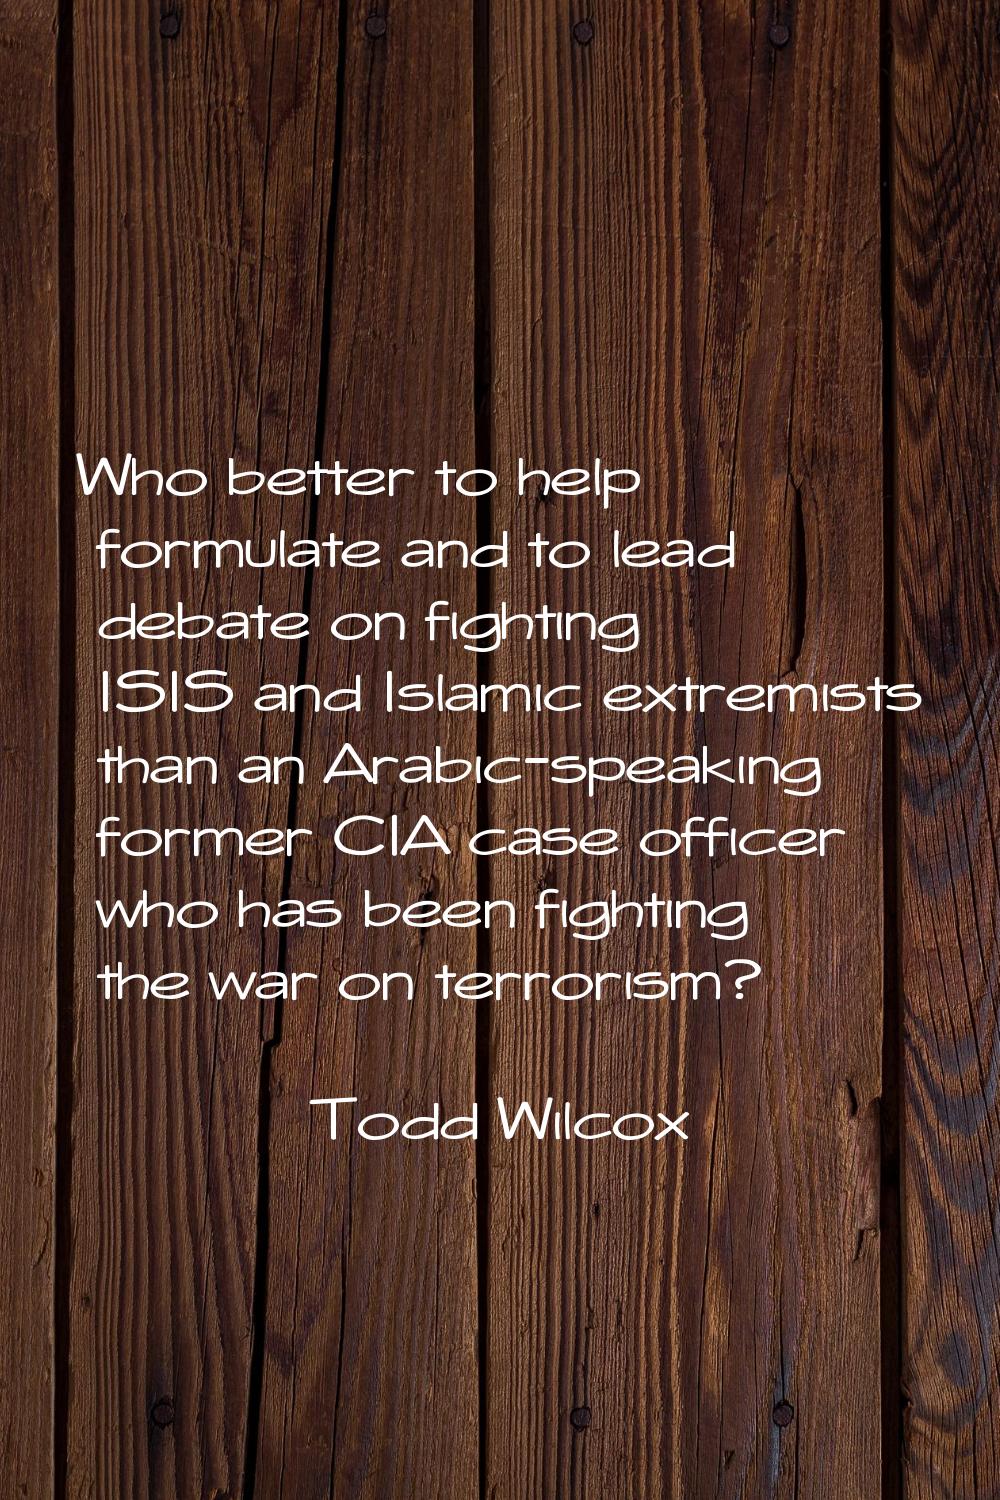 Who better to help formulate and to lead debate on fighting ISIS and Islamic extremists than an Ara